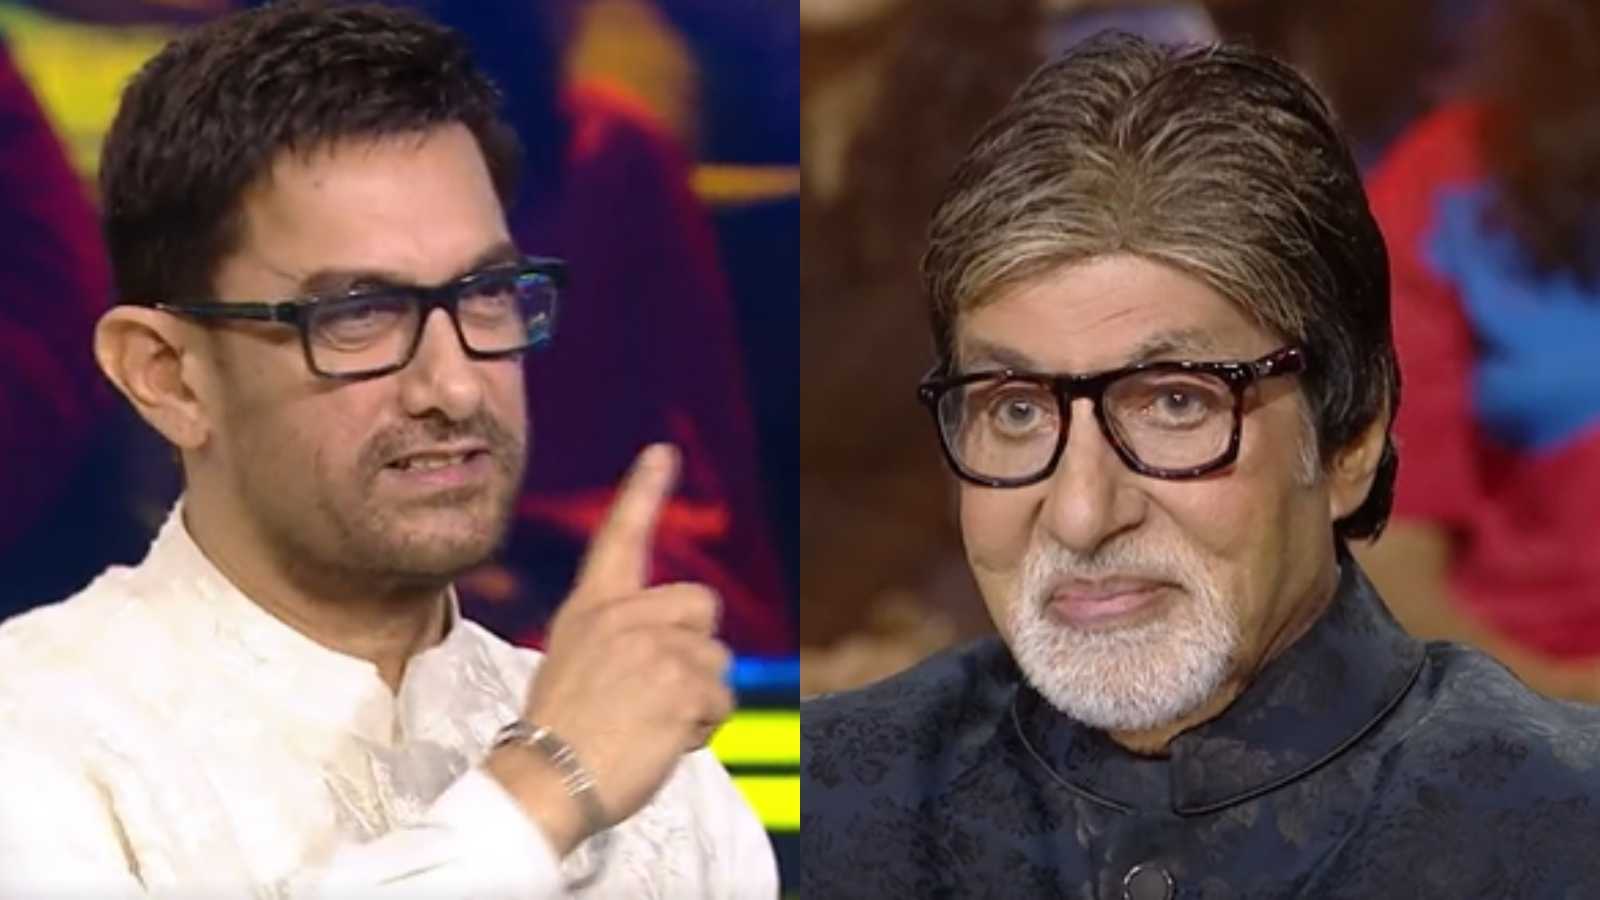 KBC 14: Aamir Khan strives for perfection even before being presented with the question, leaves Big B amused